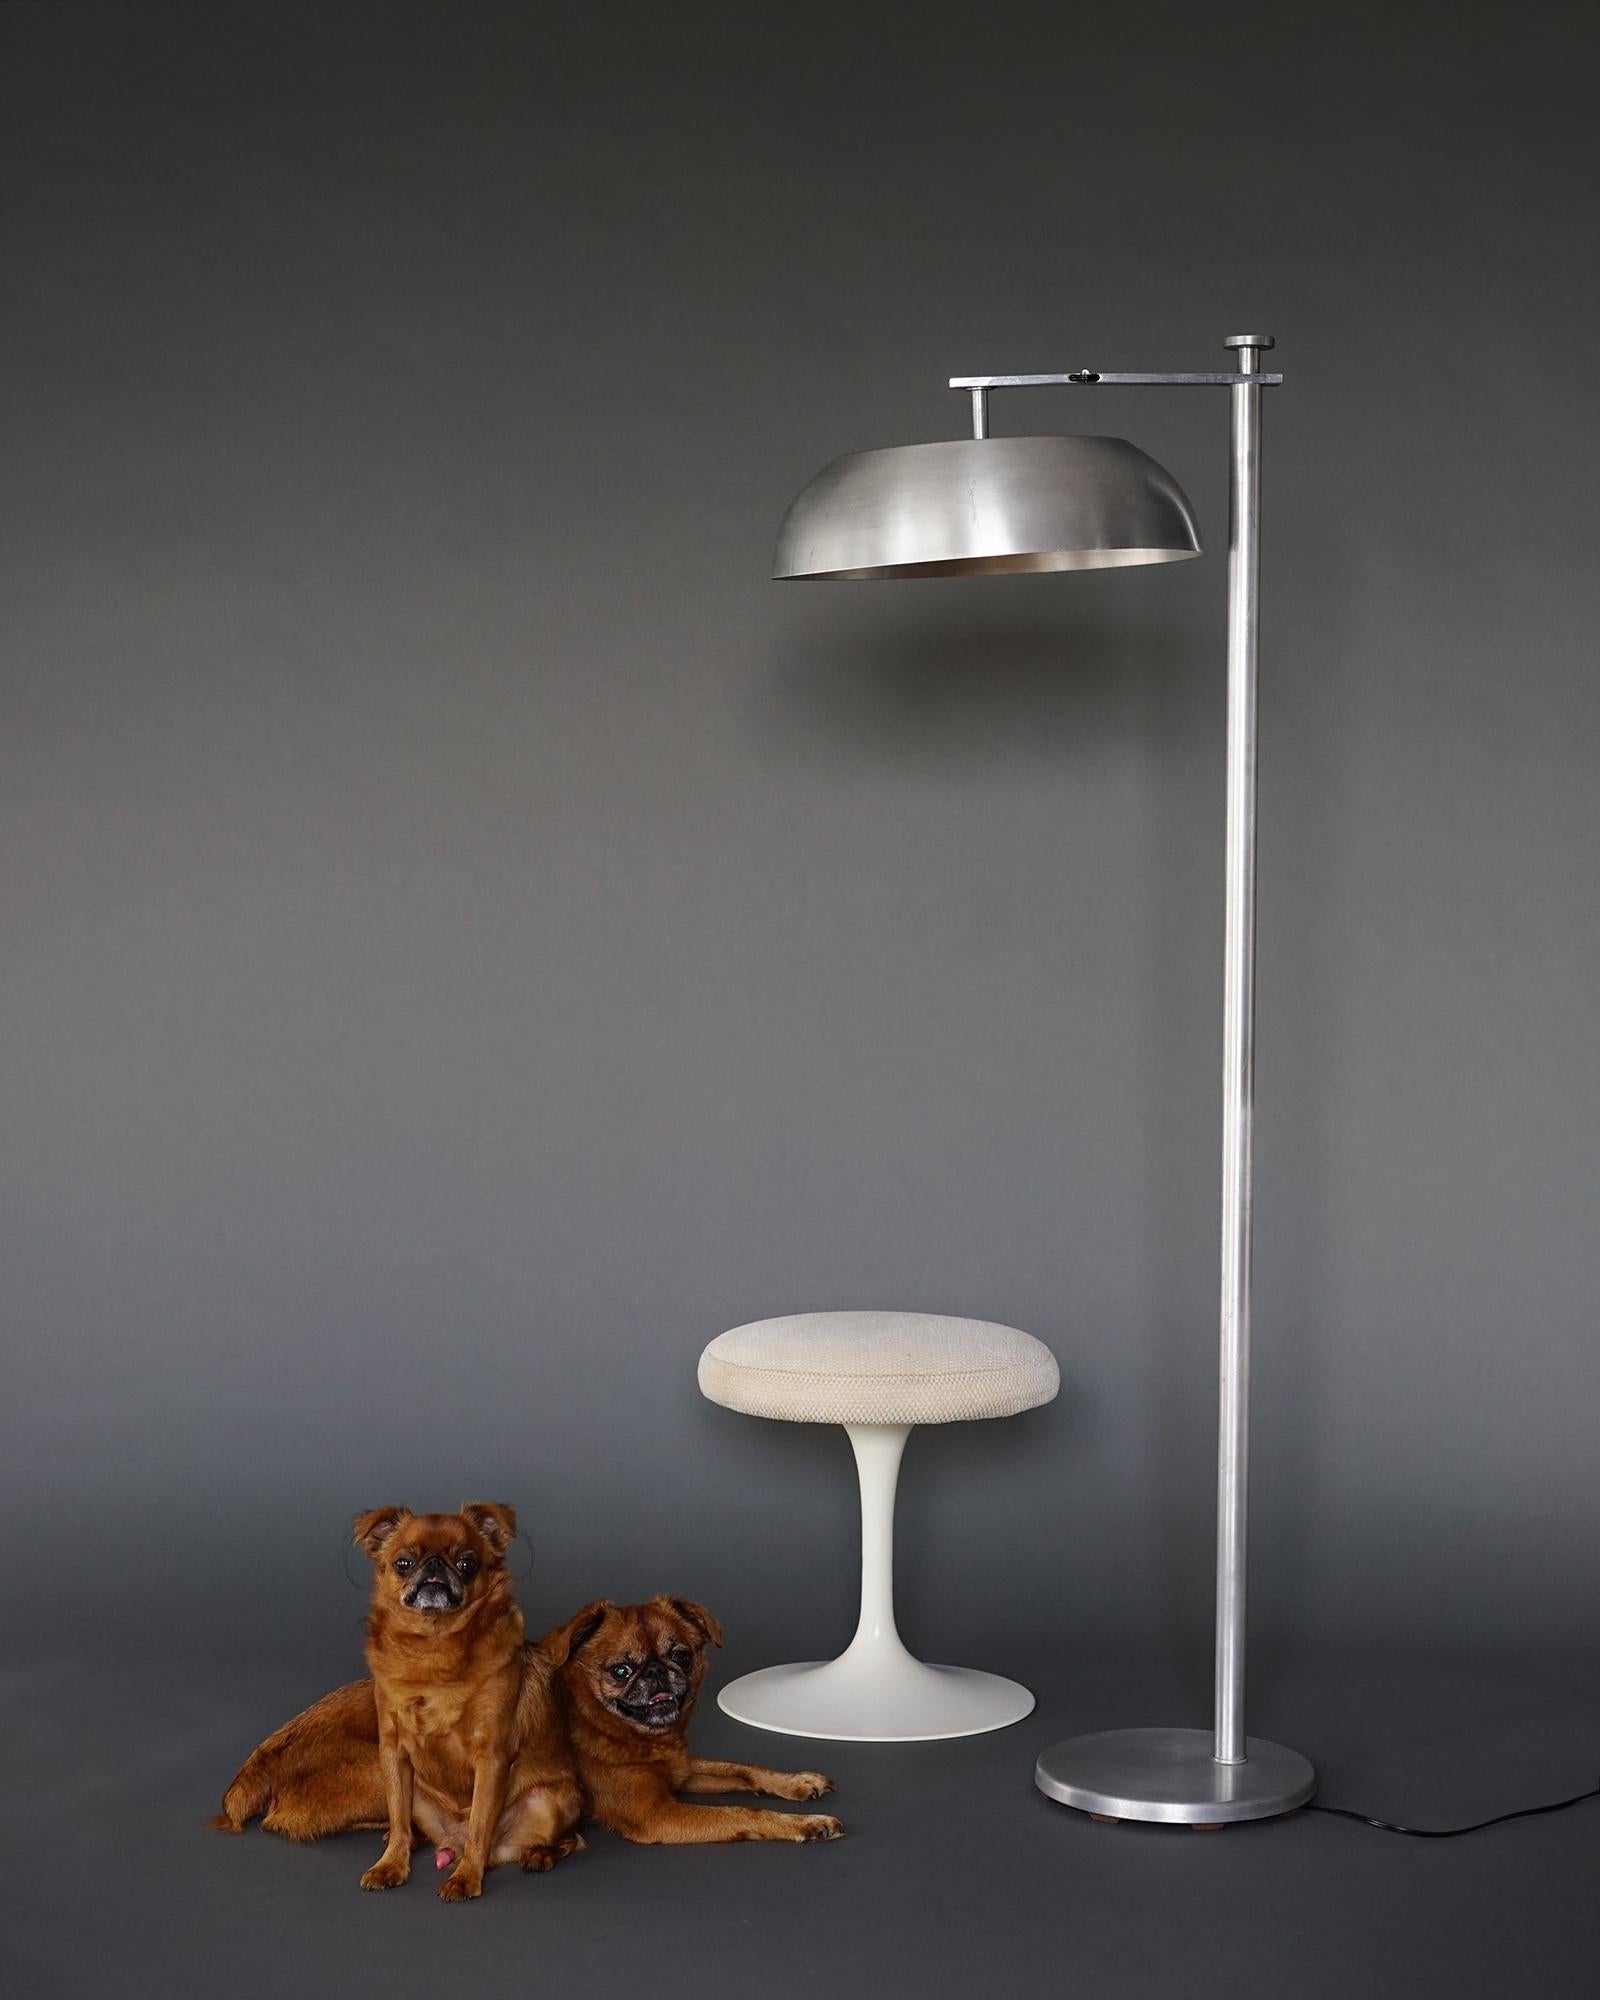 We offer free curbside viewing of this item within the 5 boroughs of New York City or by appointment at our Brooklyn studio.

We have here a handsome and versatile Machine Age floor lamp featuring its original spun aluminium shade which flips